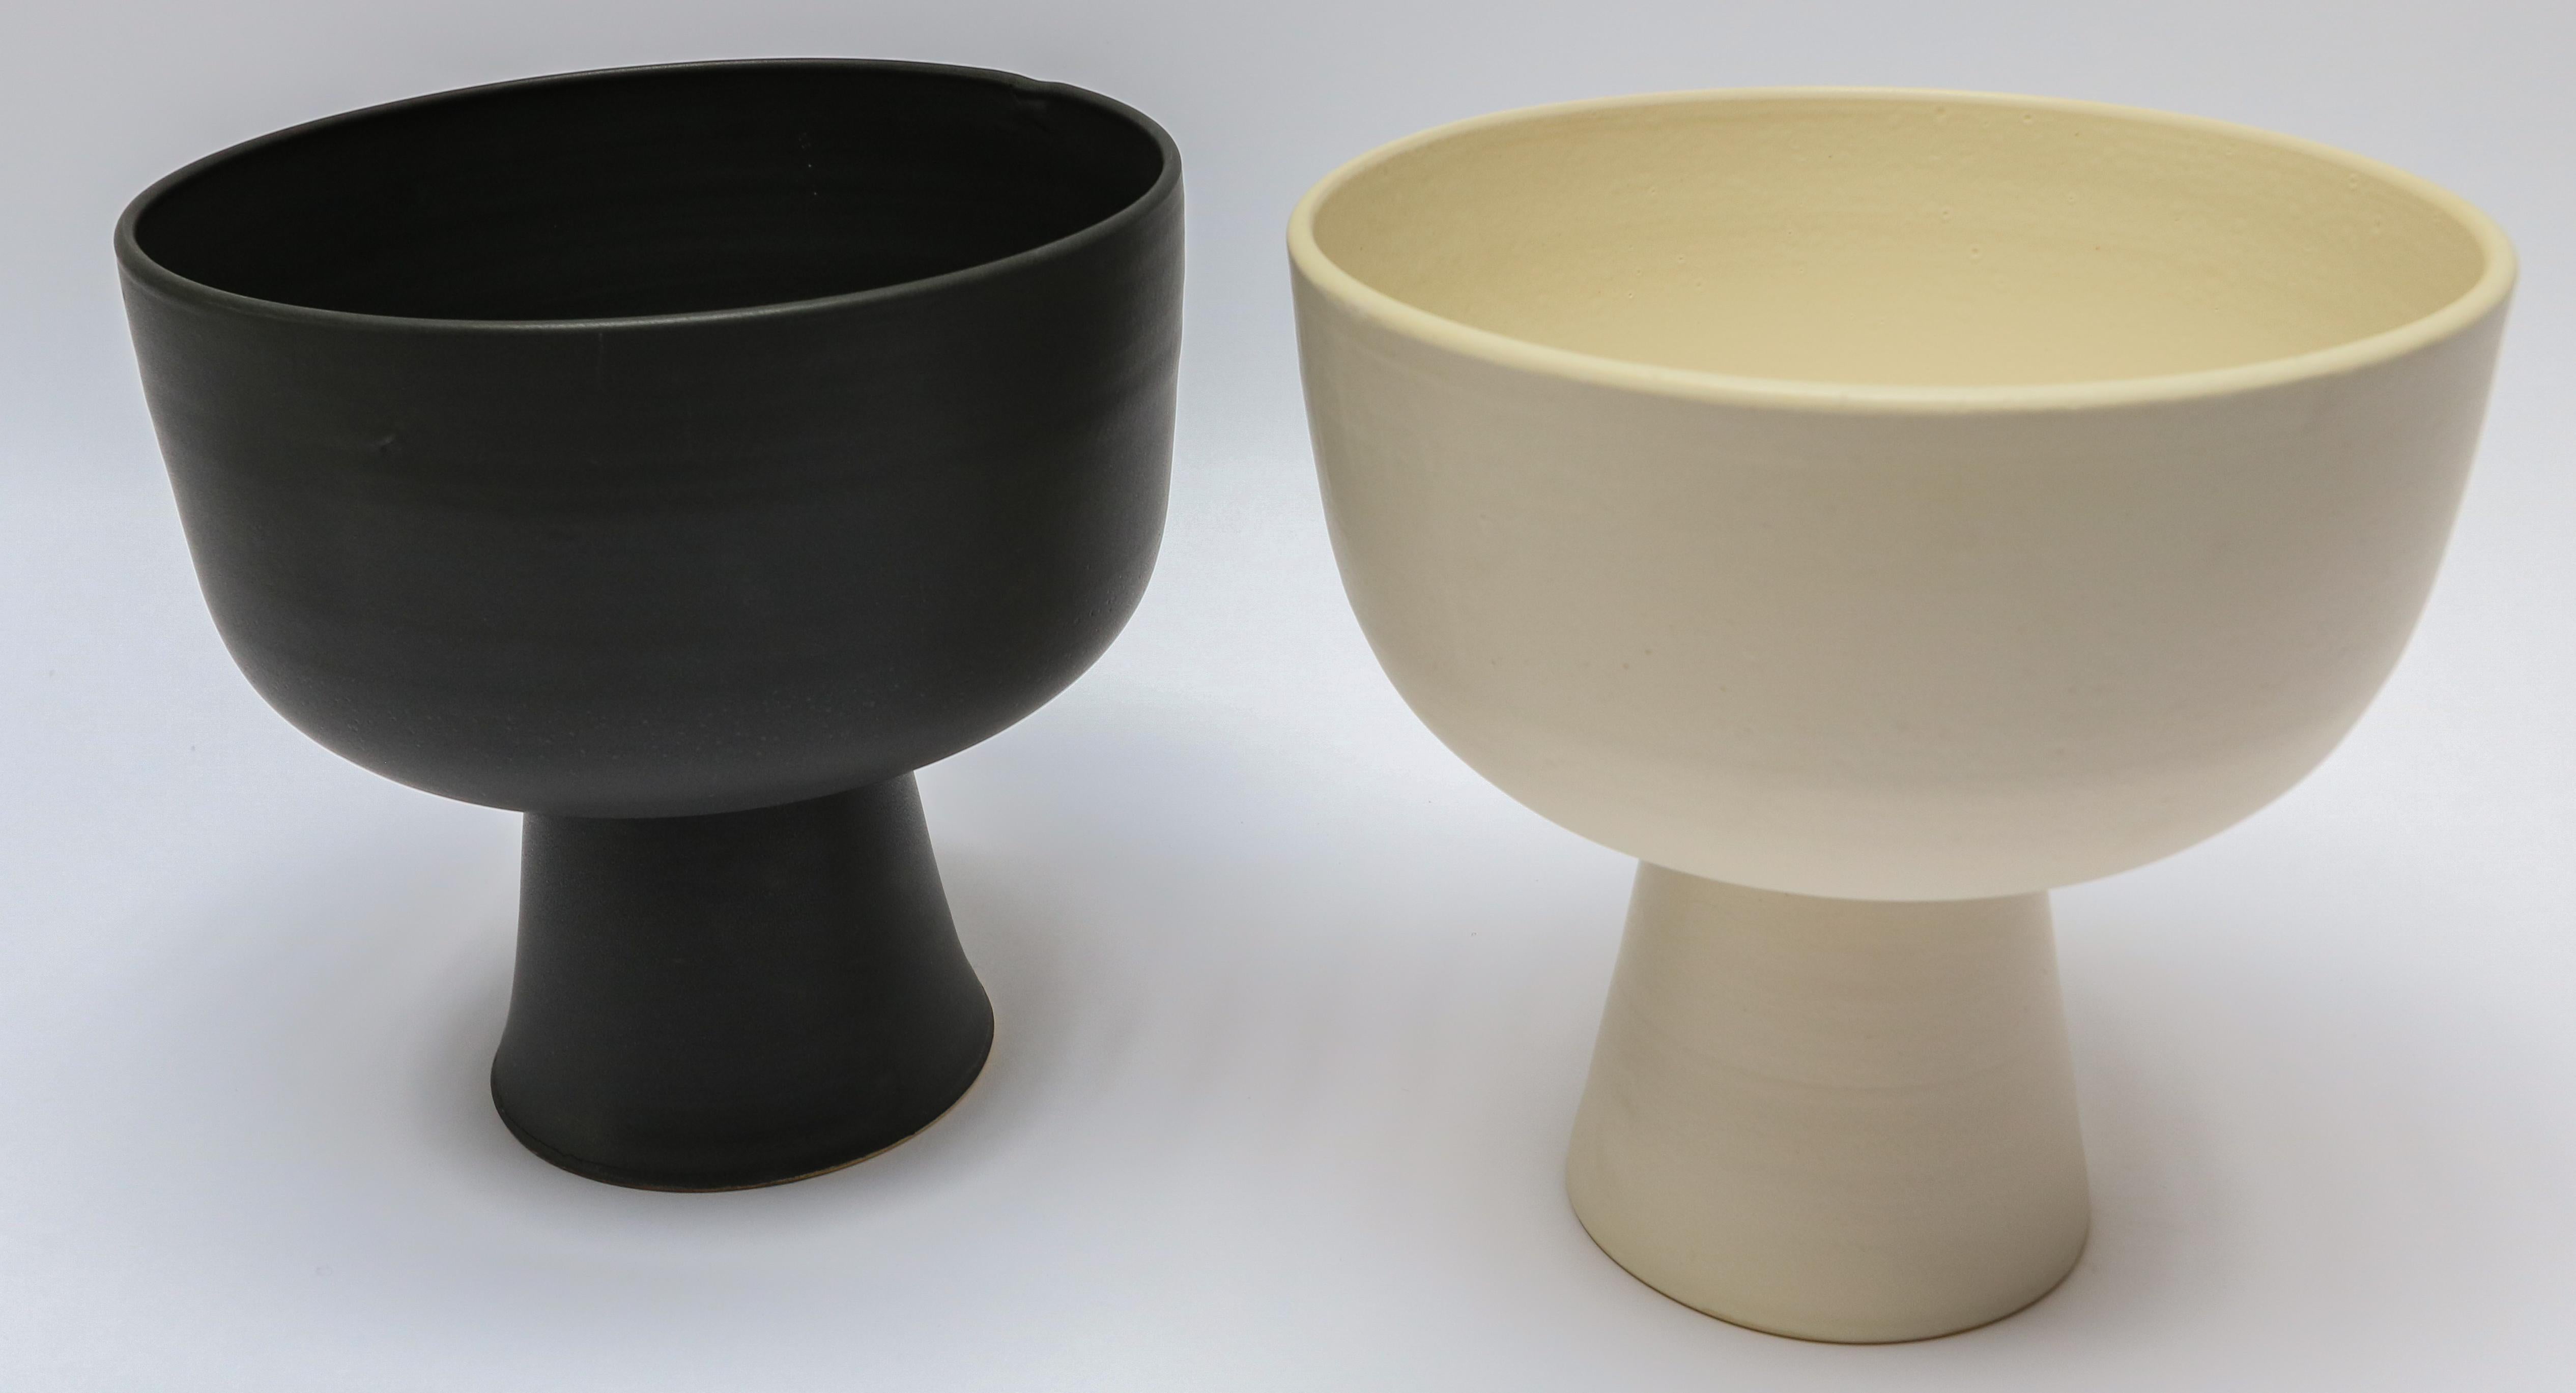 Handmade ceramic Footed bowls in blanc white (400183) and noir black (400184) by Style Union Home. Priced individually.